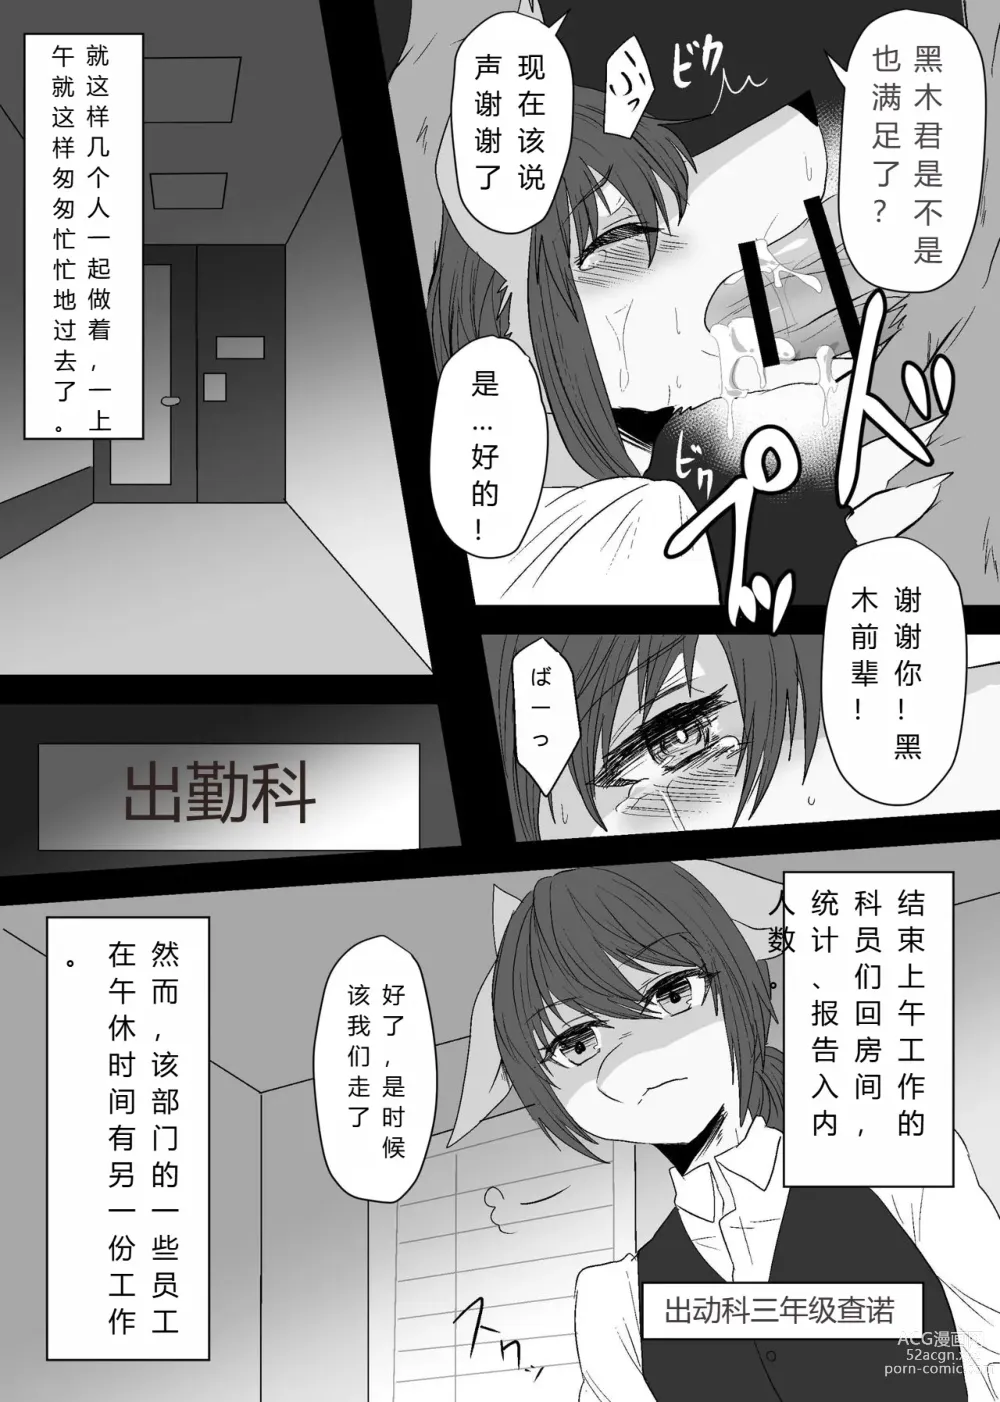 Page 12 of doujinshi 我们要上班吗？